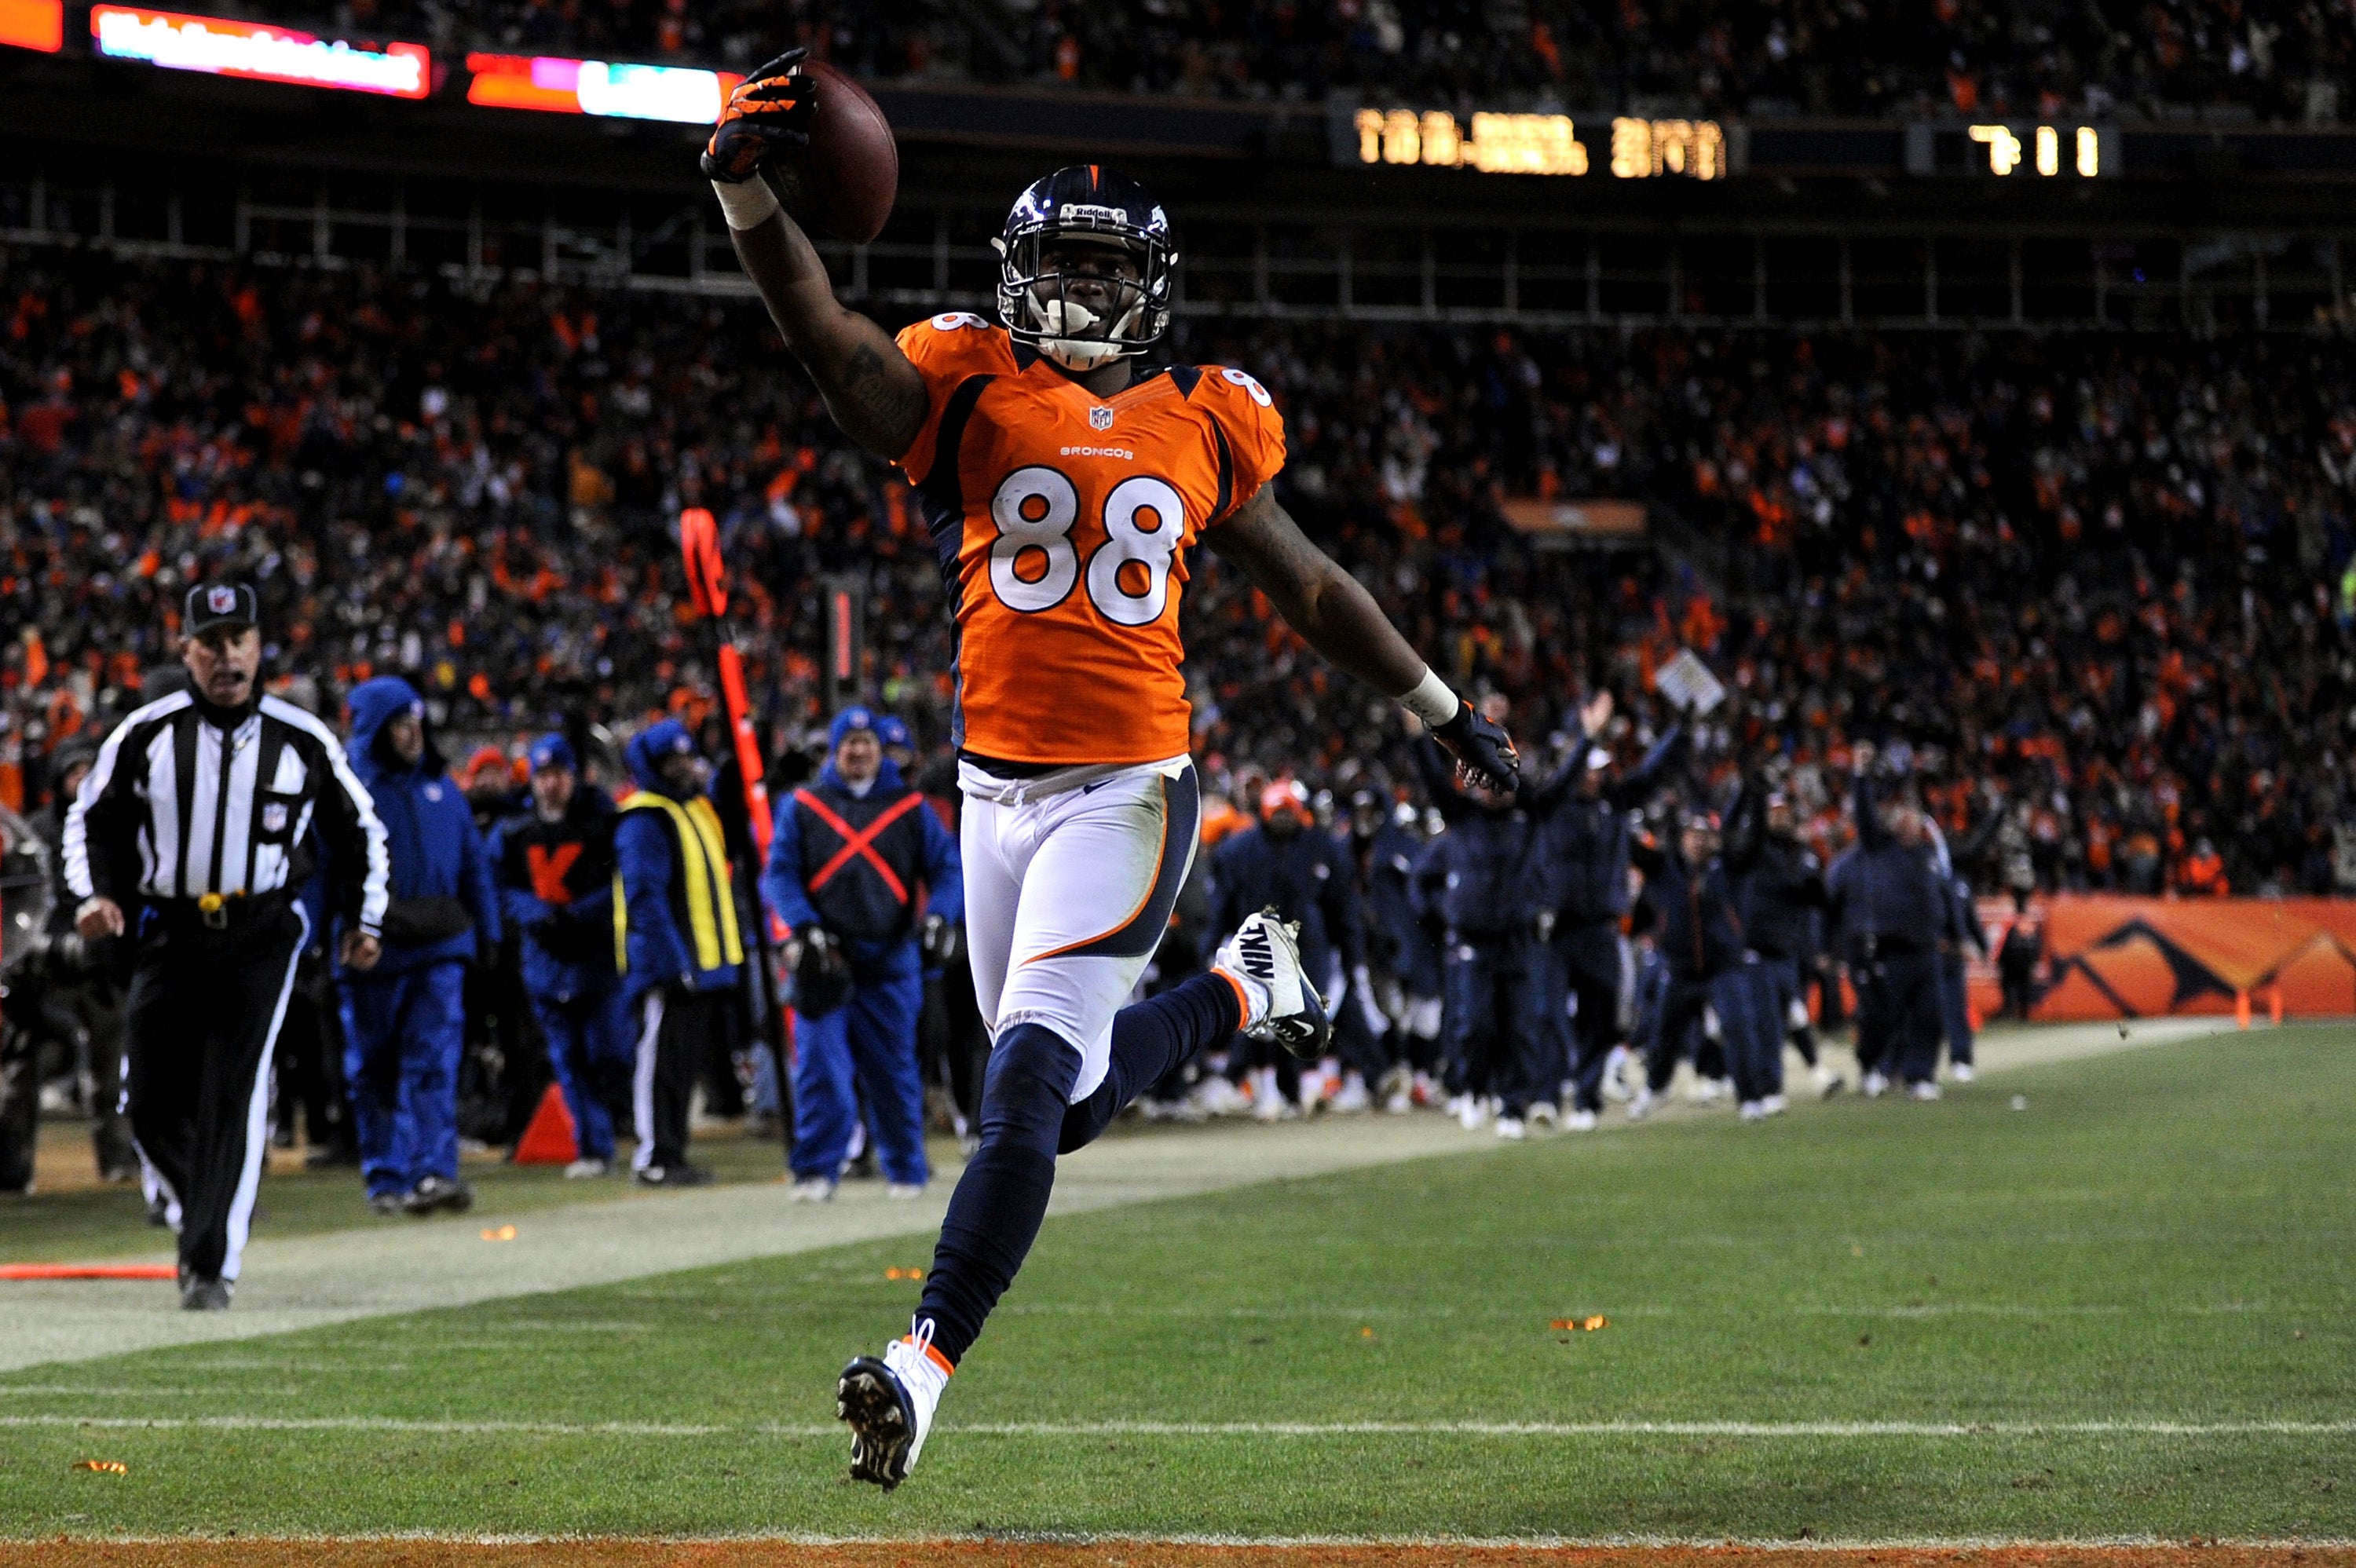 Demaryius Thomas enjoyed a standout career with the Denver Broncos